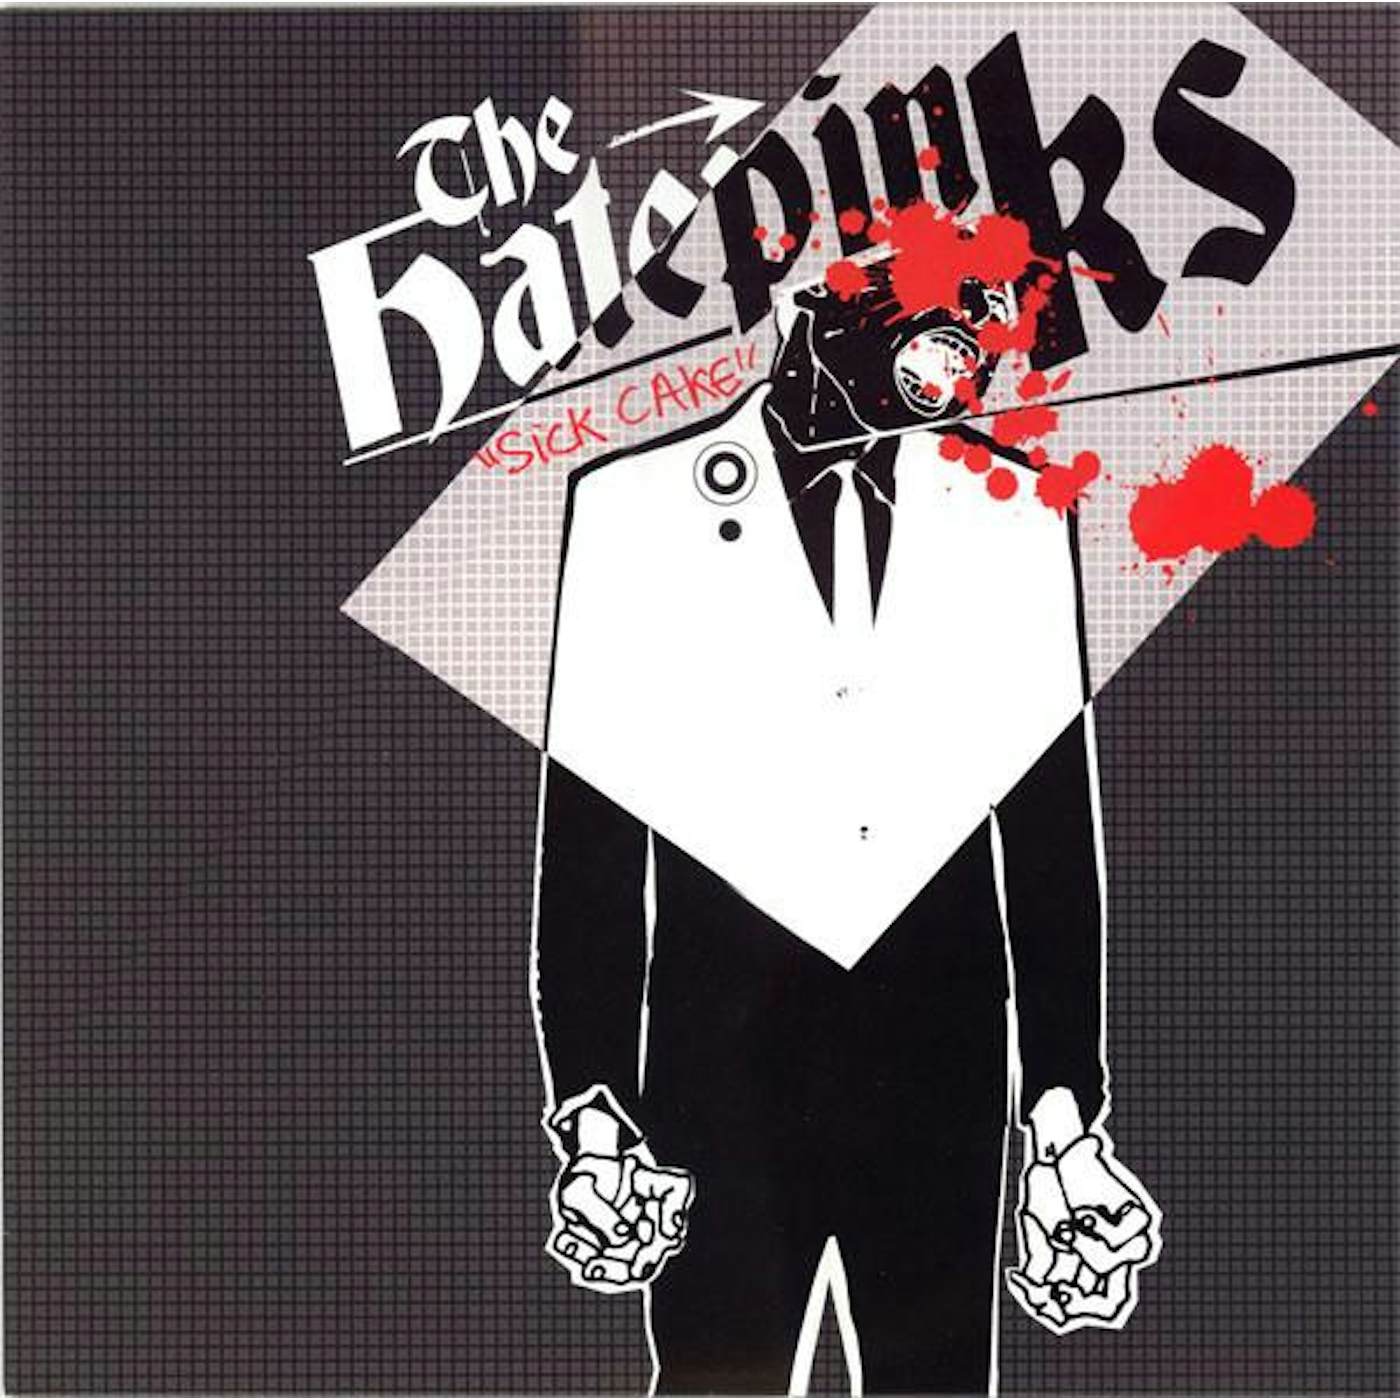 The Hatepinks – Sick Cake lp - the edges of the cover have very light wear from shipping to the vendor (Vinyl)